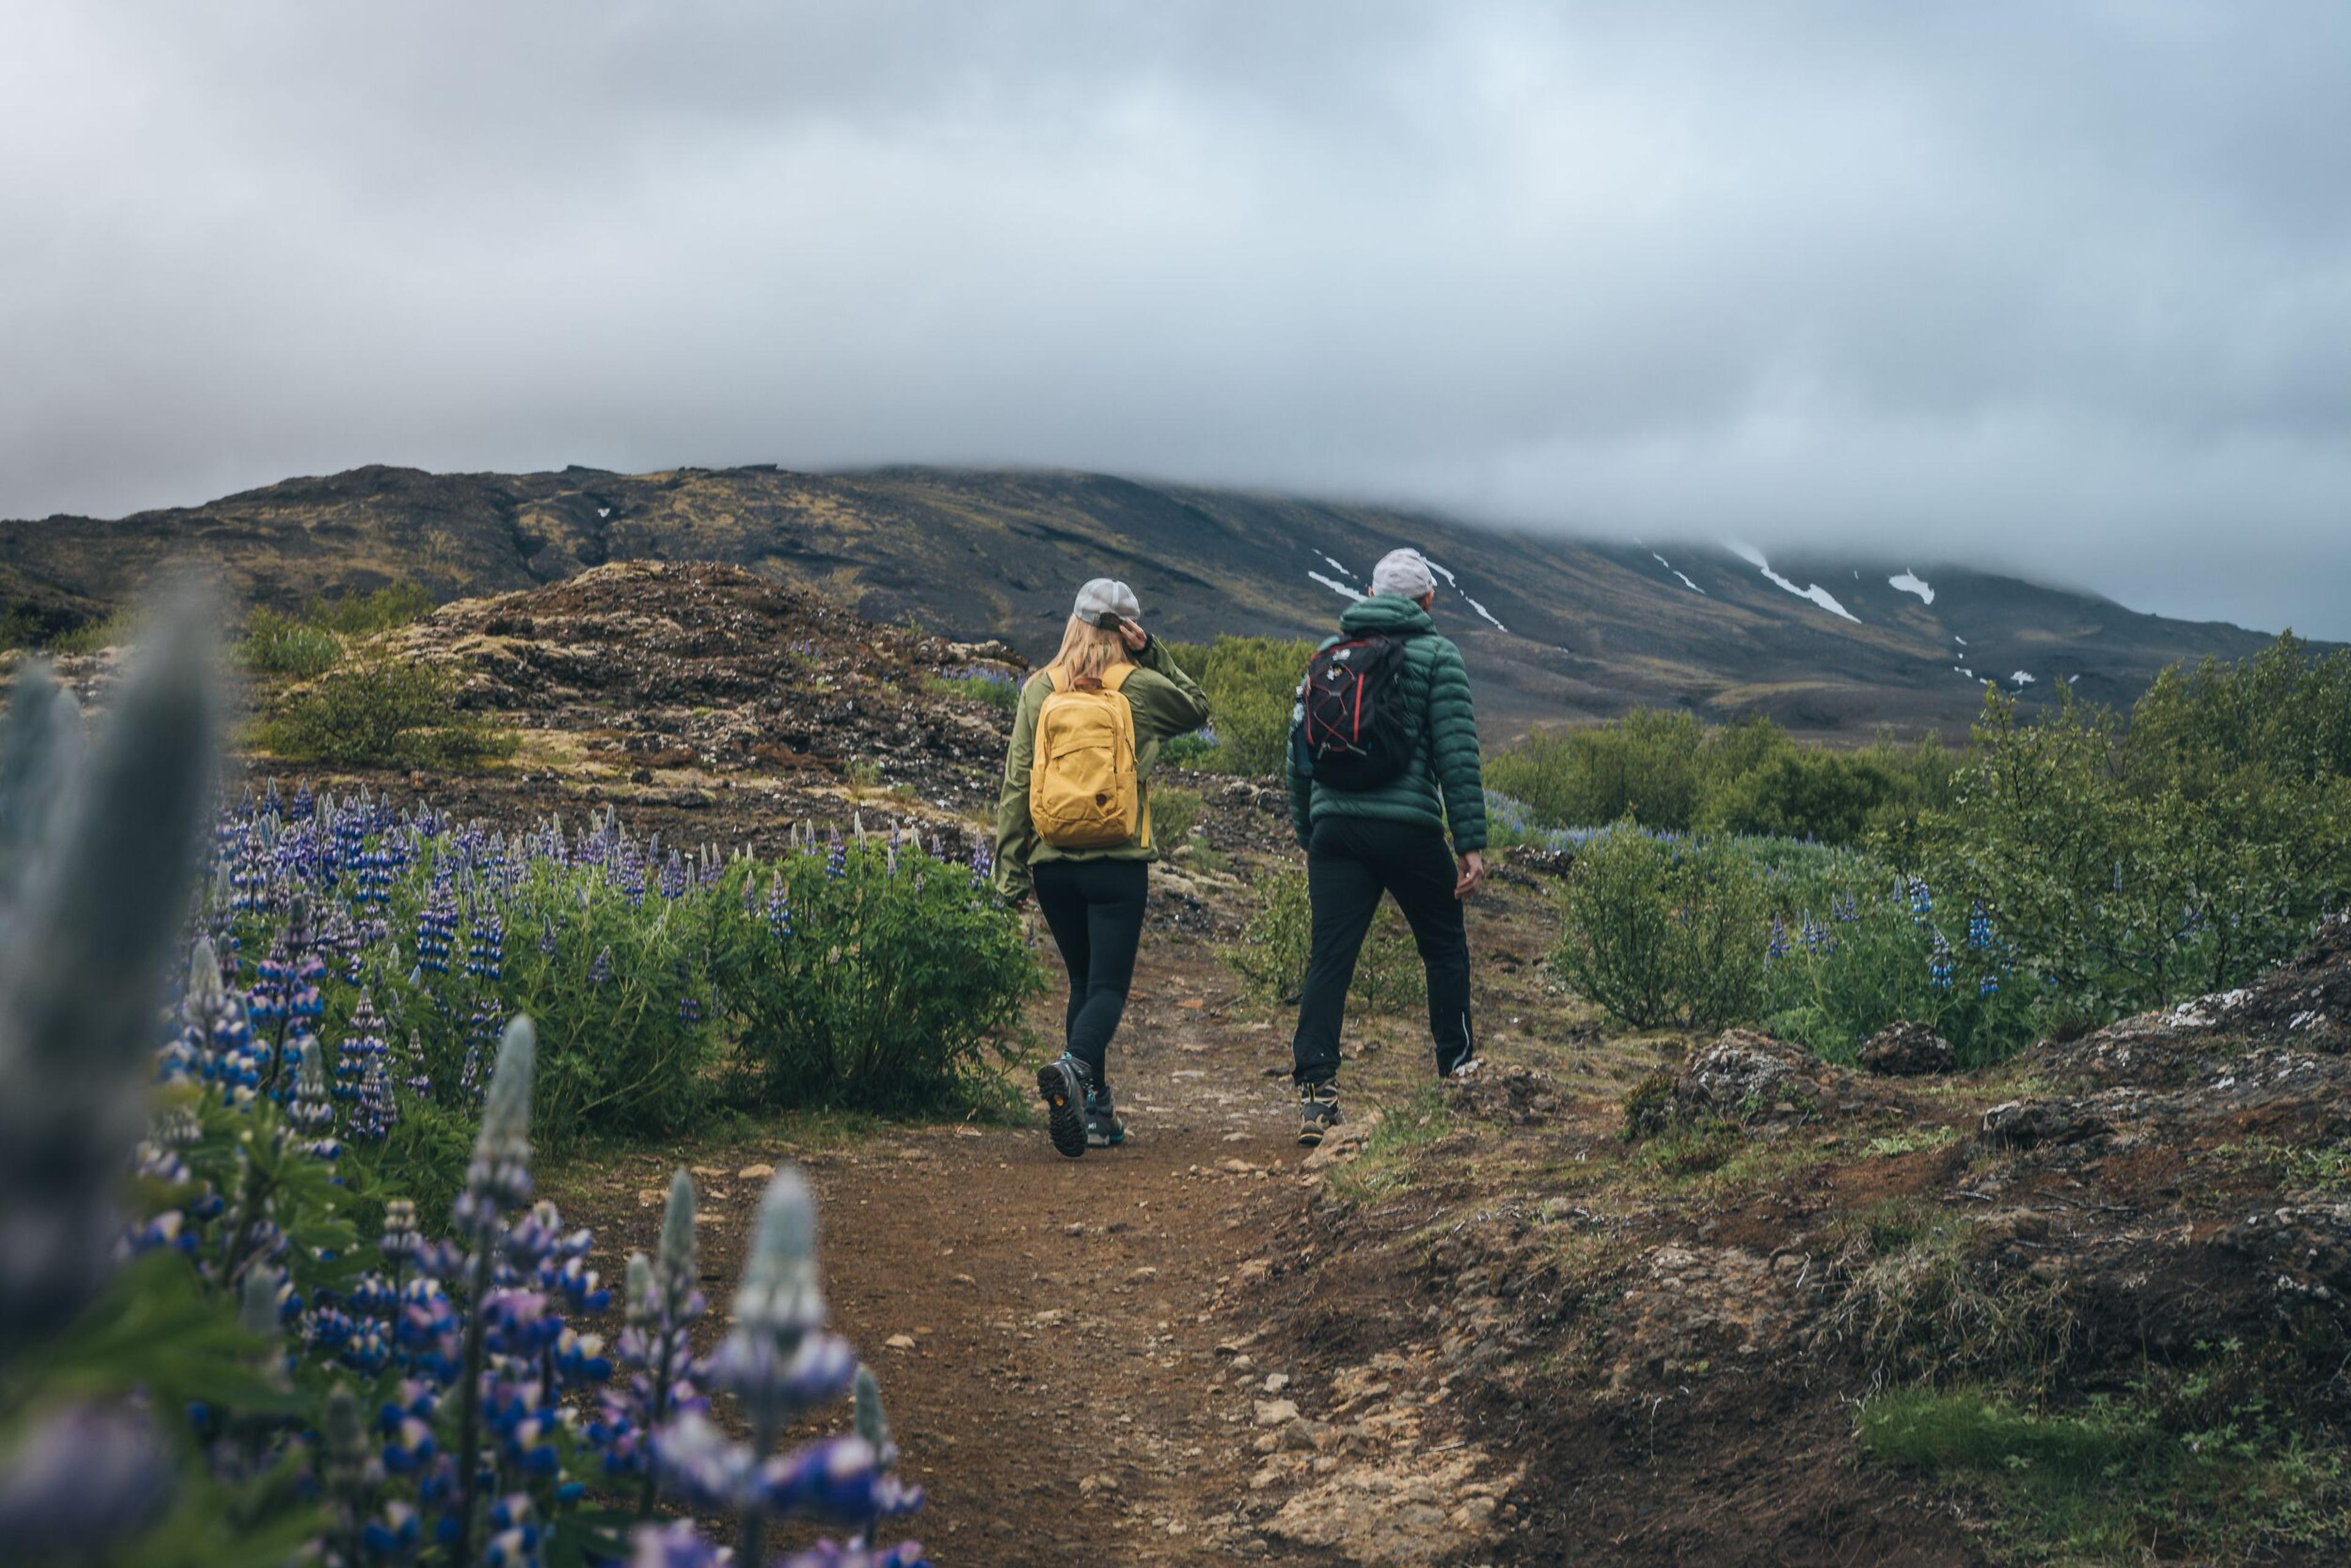 Two hikers, one in a yellow jacket and the other in a green jacket, walking on a trail surrounded by blooming purple lupine flowers, with a misty, mountainous landscape in the background.